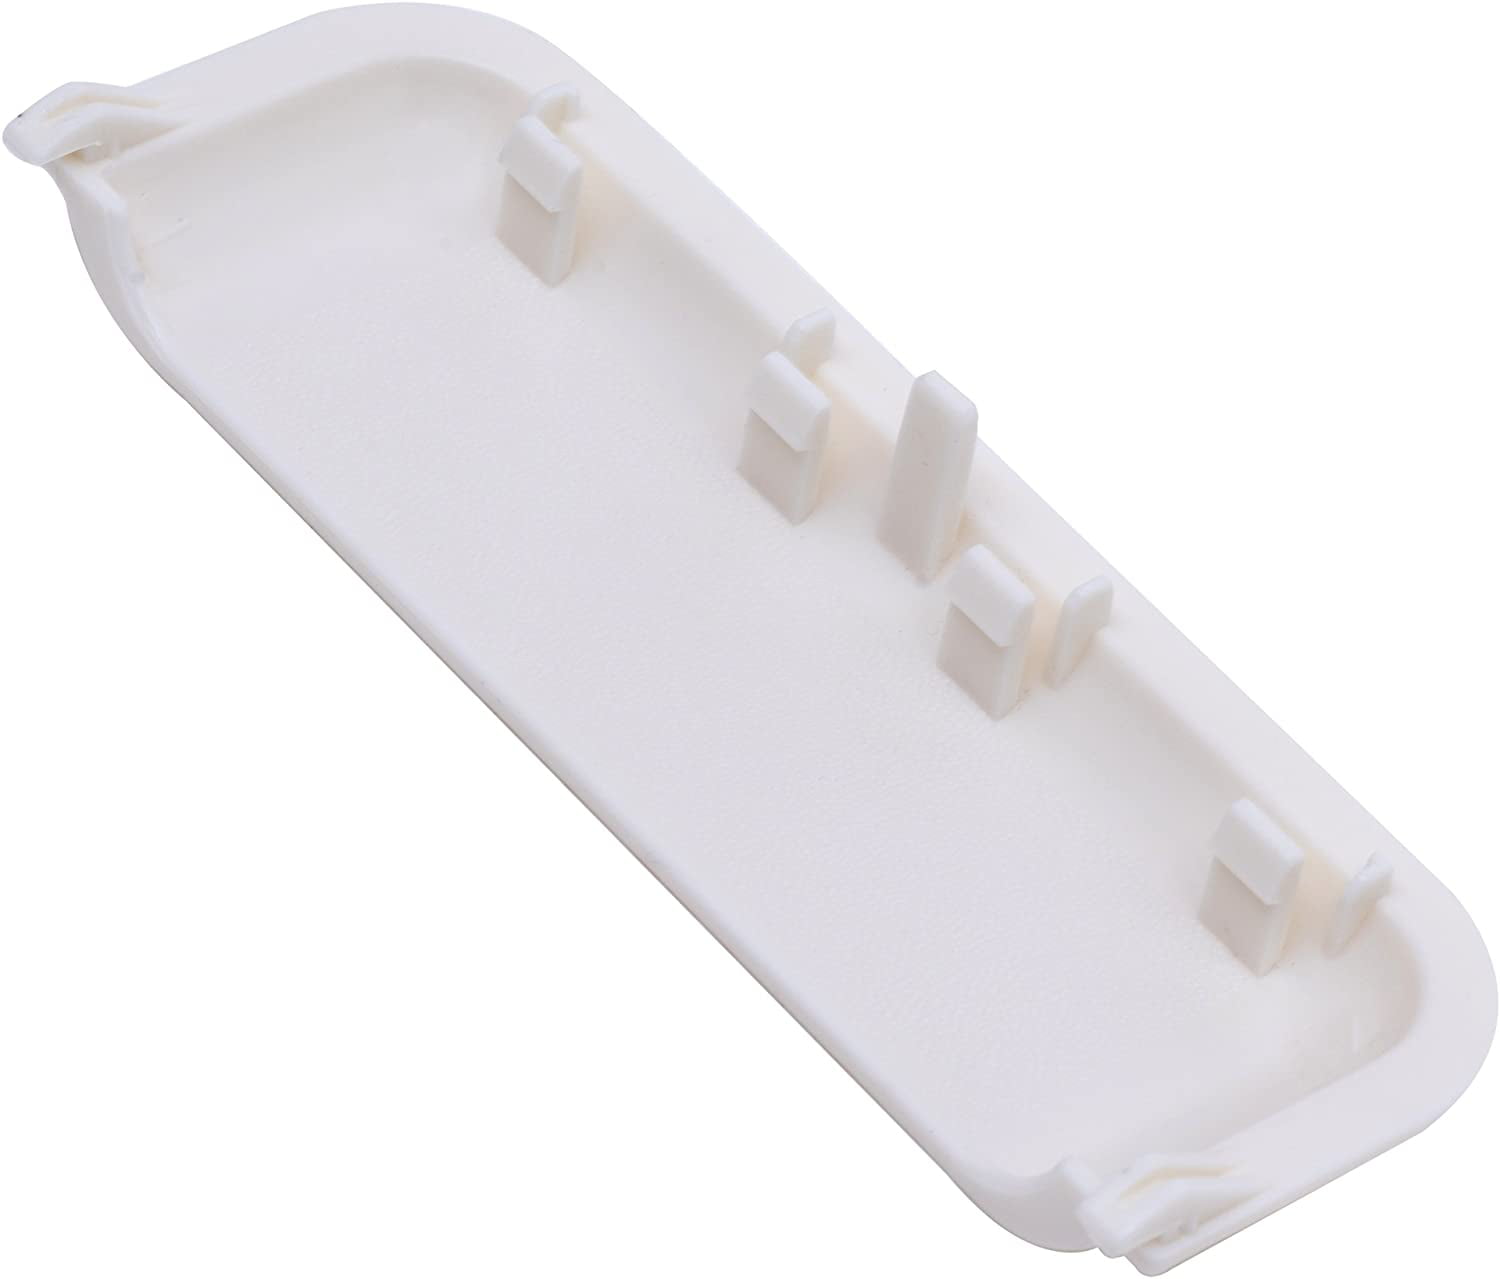 Compatible with Part Number AP5999398 W10861225 White Dryer Door Handle Replacement for Whirlpool & Maytag Dryers PS11731583 